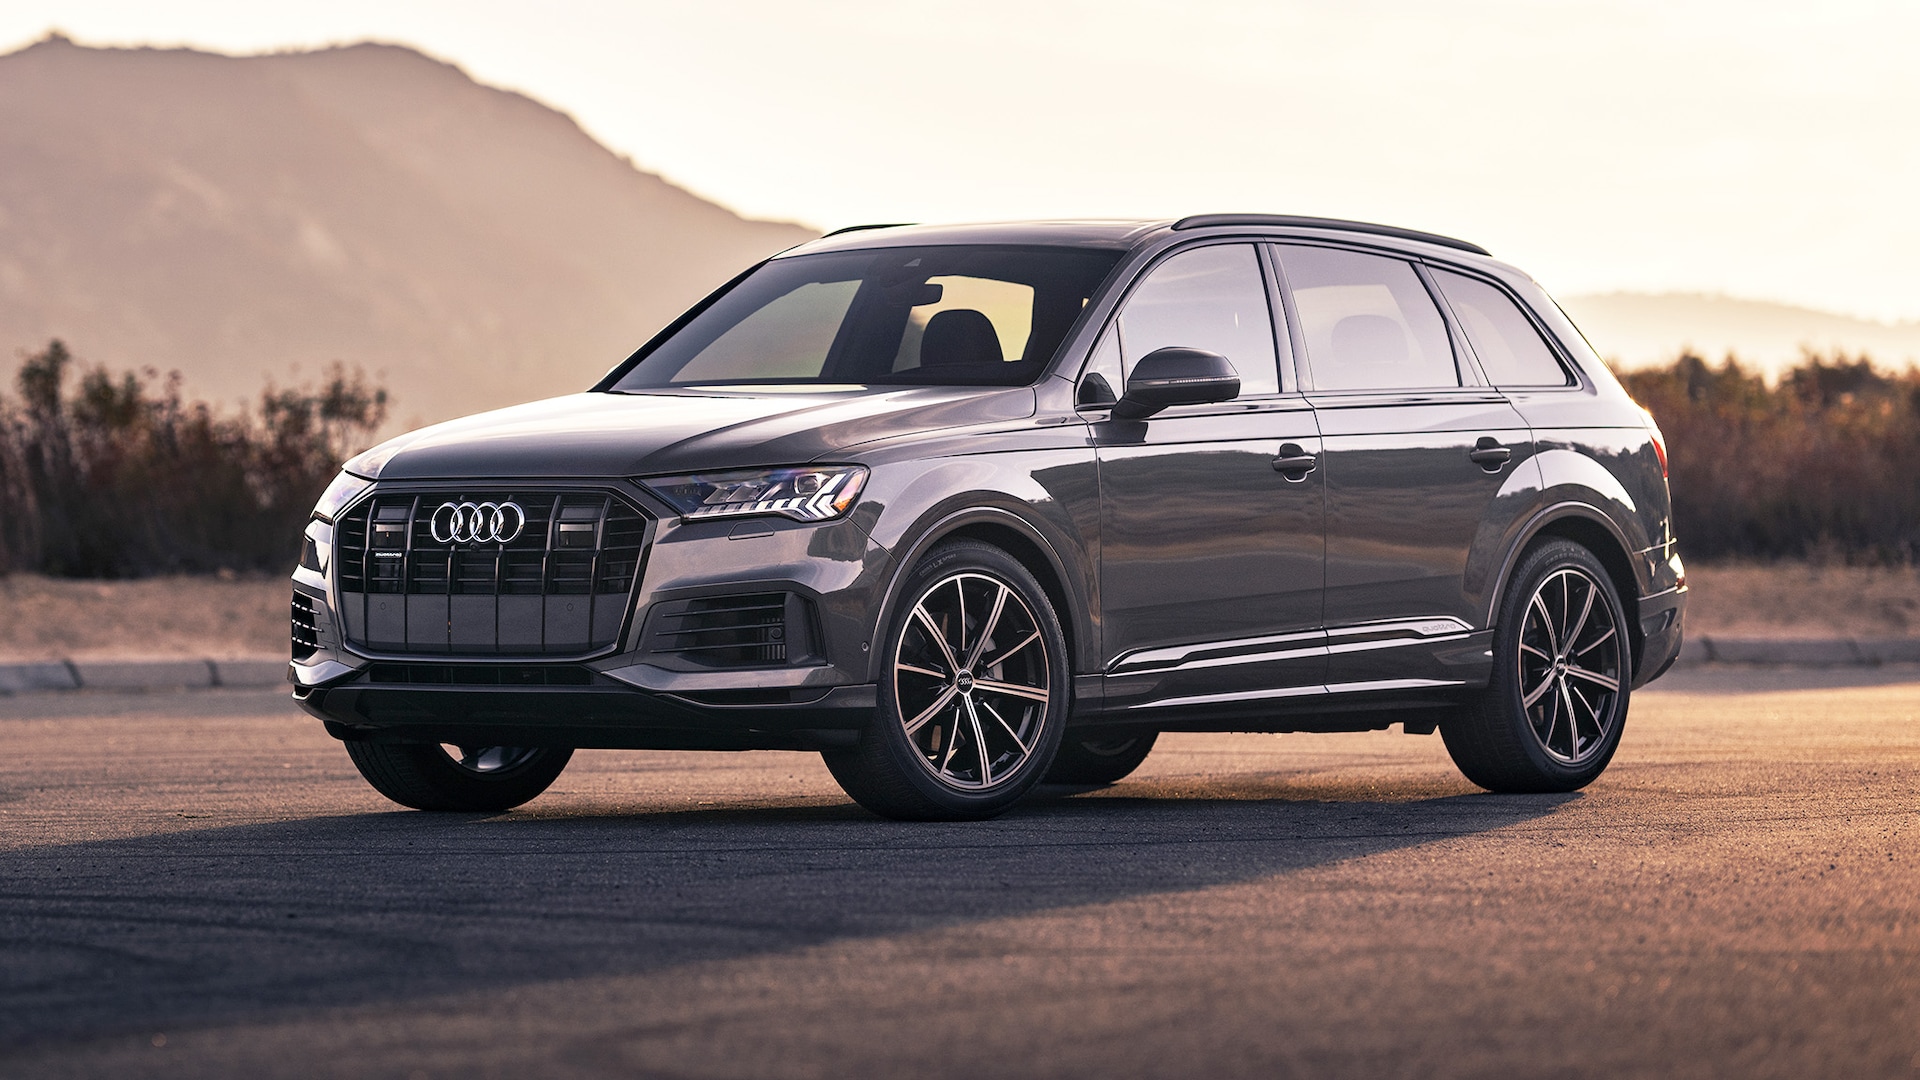 2023 Audi Q7 Prices, Reviews, and Photos - MotorTrend